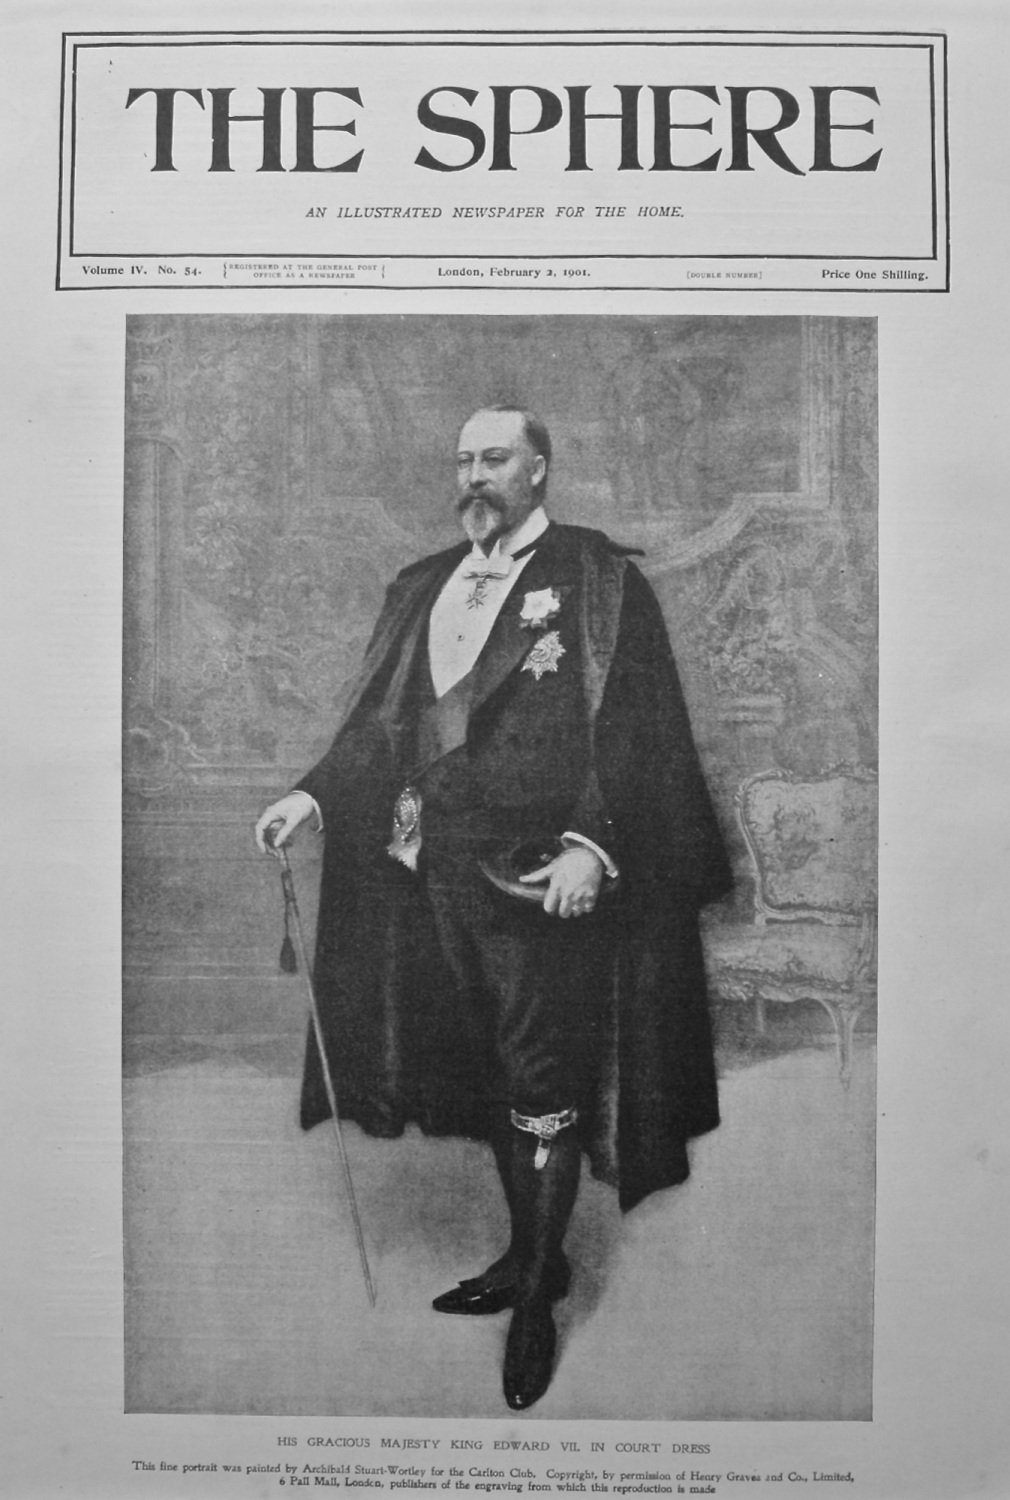 His Gracious Majesty King Edward VII. in Court Dress. 1901.